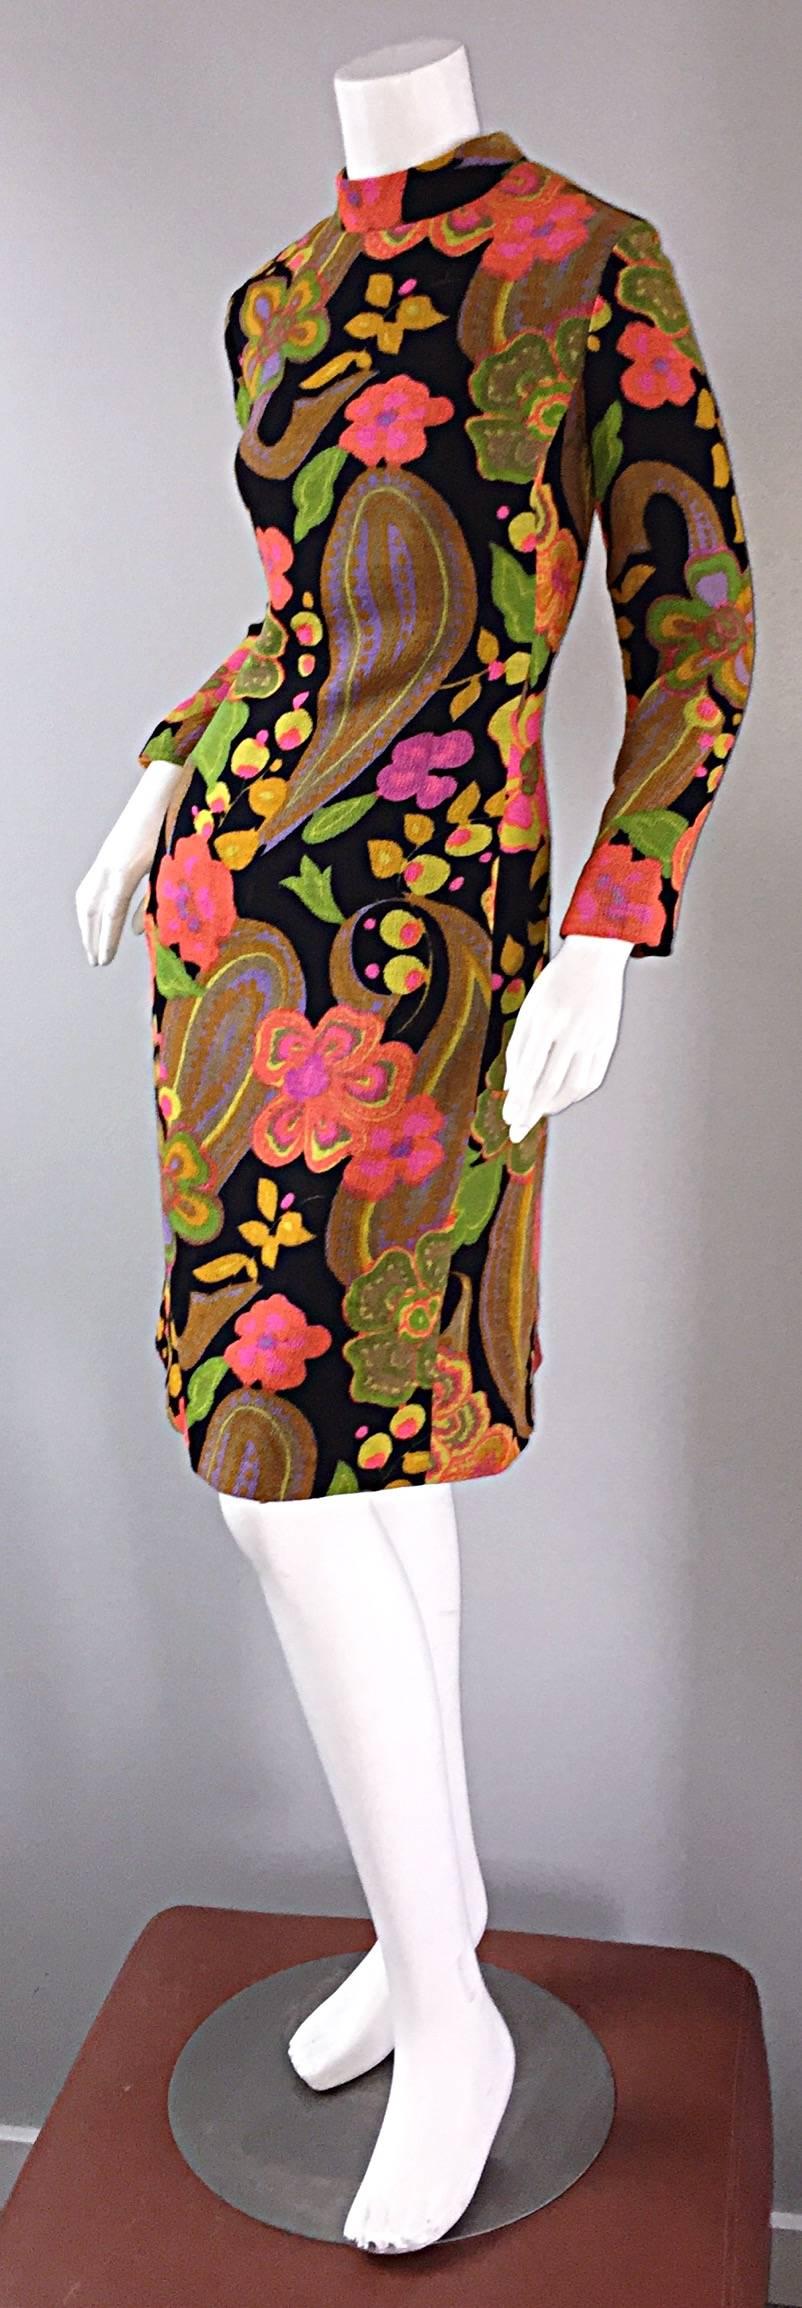 1960s psychedelic dress